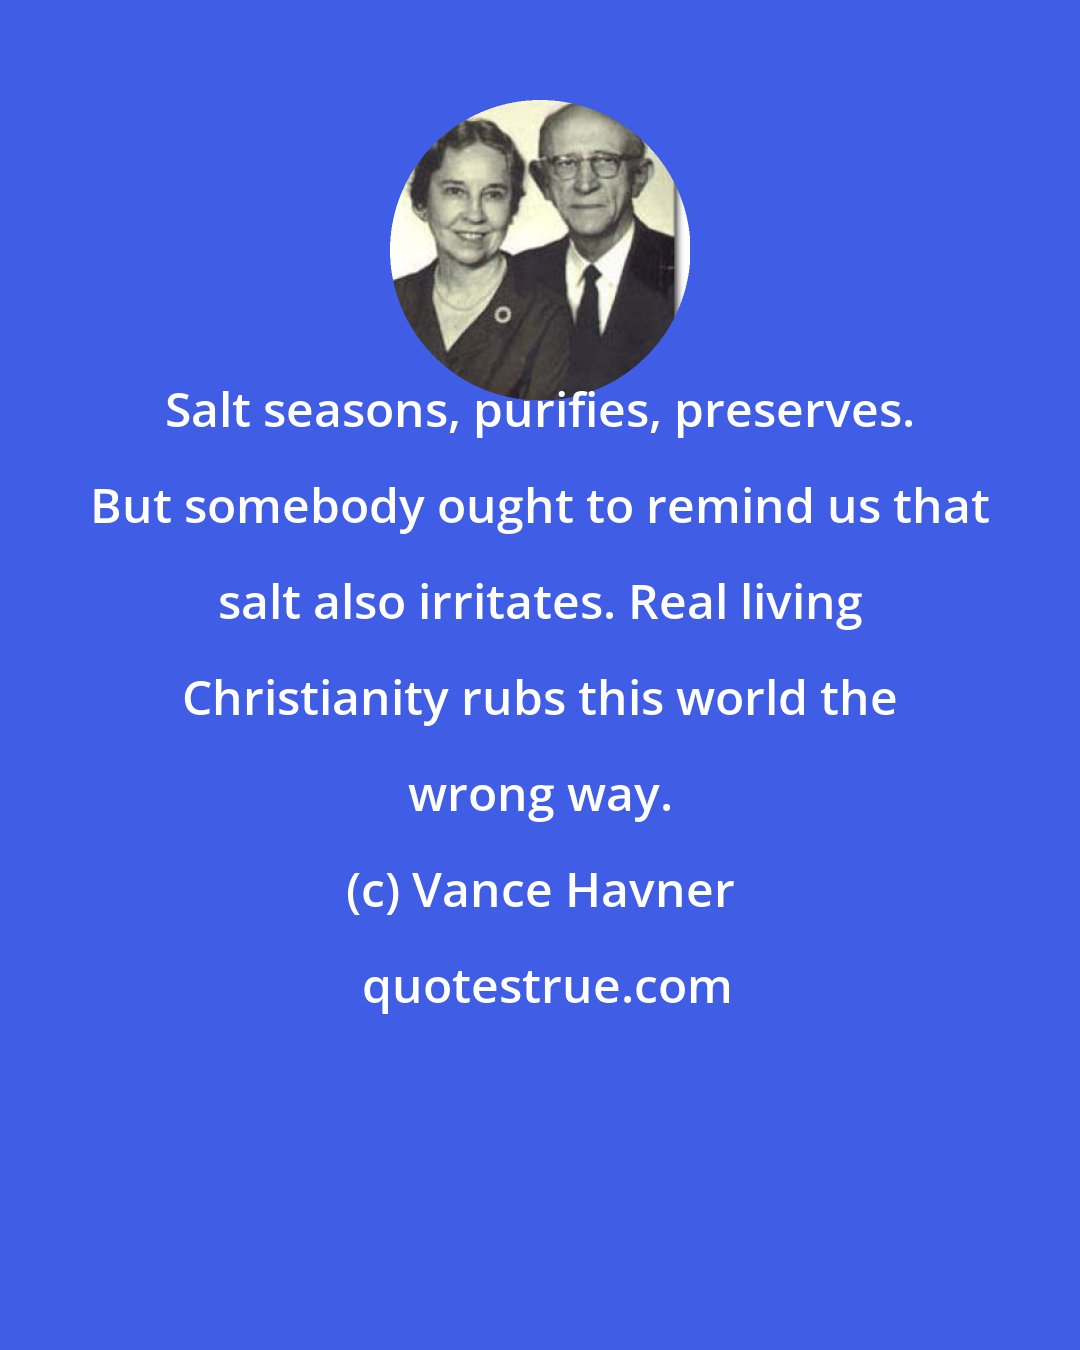 Vance Havner: Salt seasons, purifies, preserves. But somebody ought to remind us that salt also irritates. Real living Christianity rubs this world the wrong way.